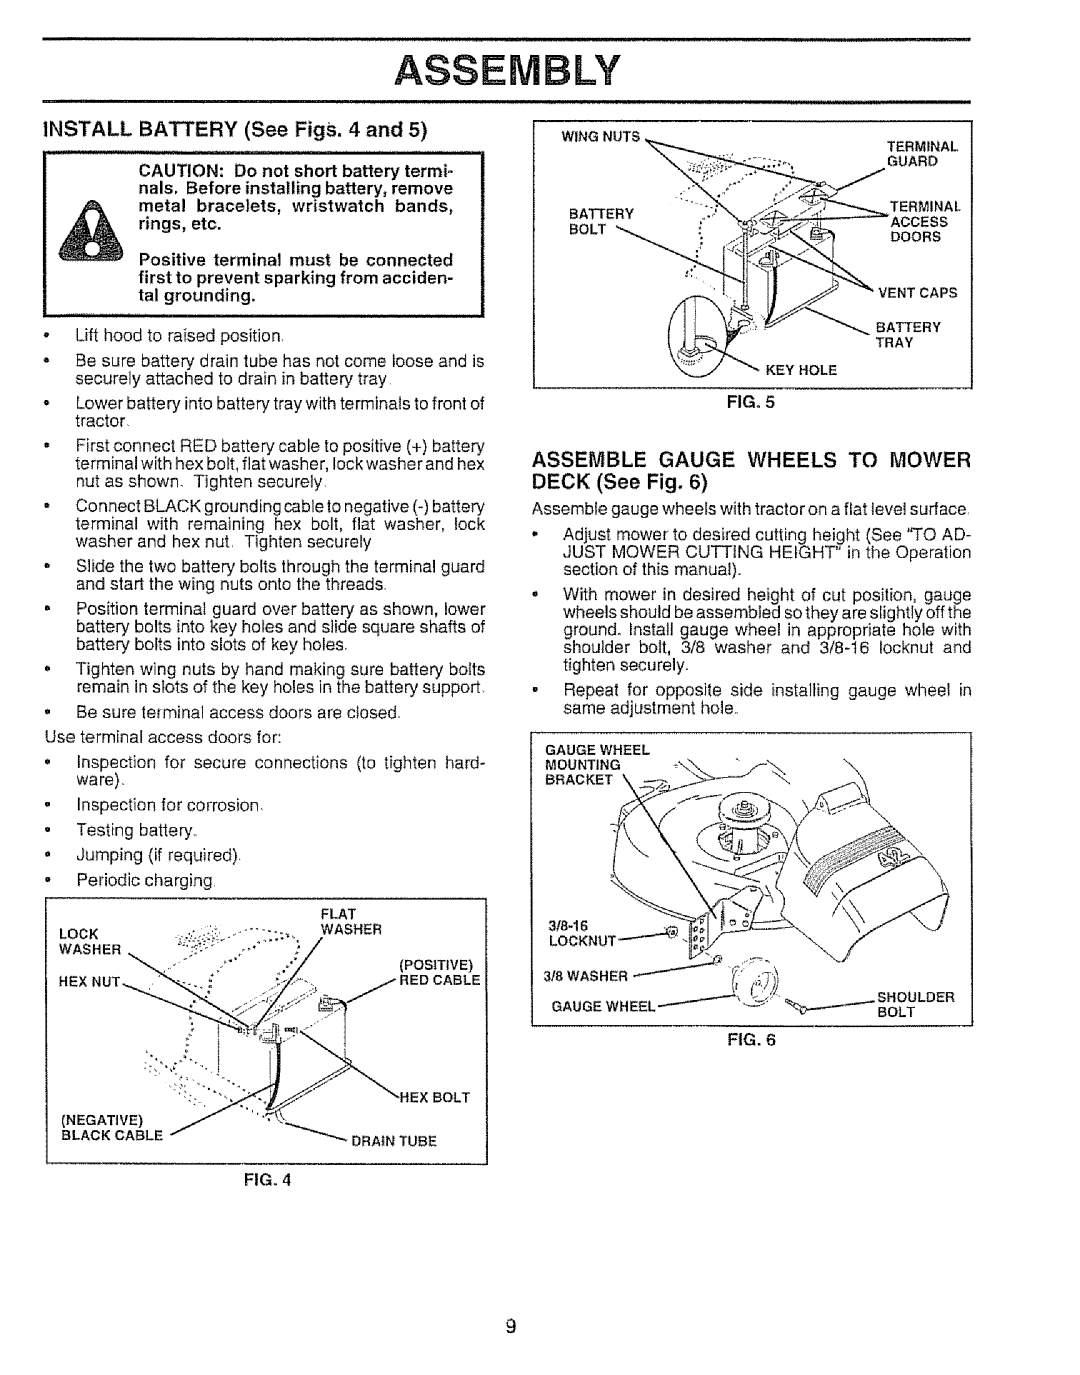 Sears 917.257651 owner manual Assembly, Access, INSTALL BATTERY See Figs. 4 and, Uul, -___, I It, Ventcaps, Doors 